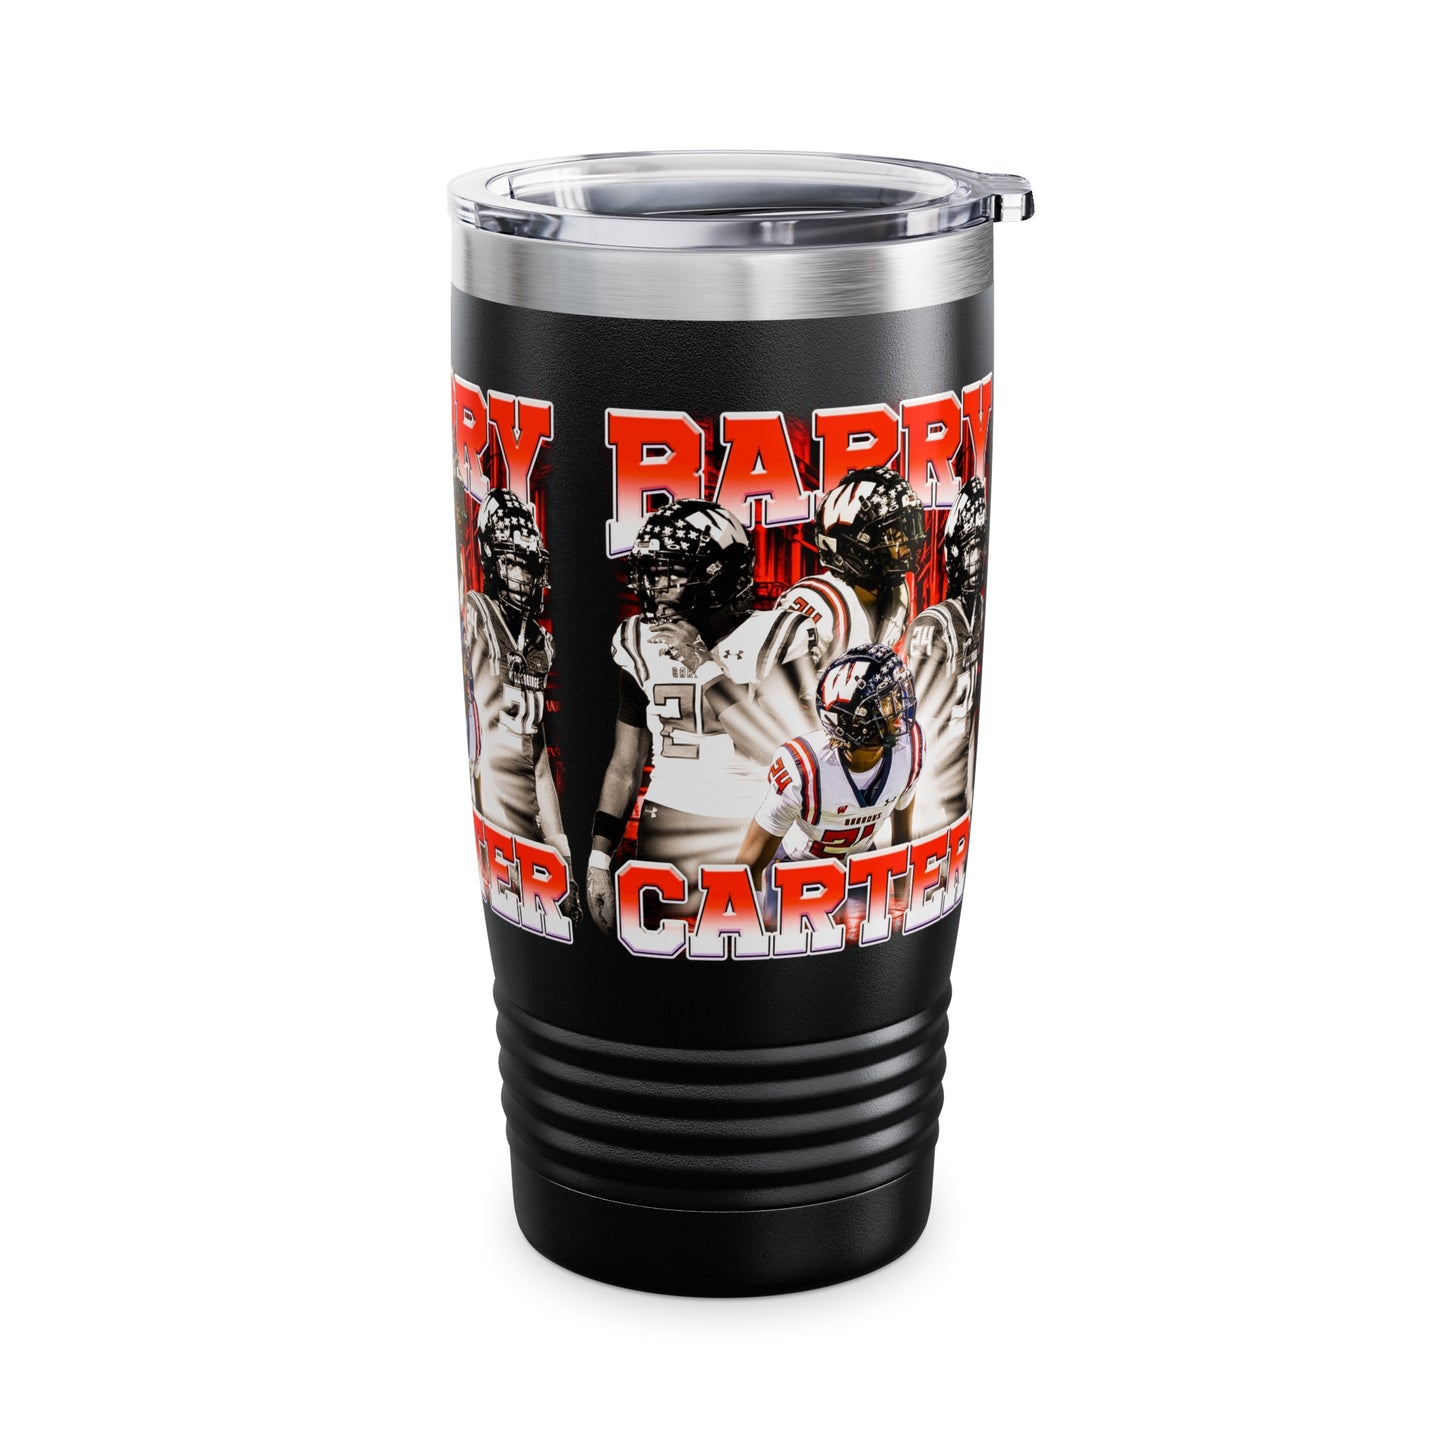 Barry Carter Stainless Steel Tumbler